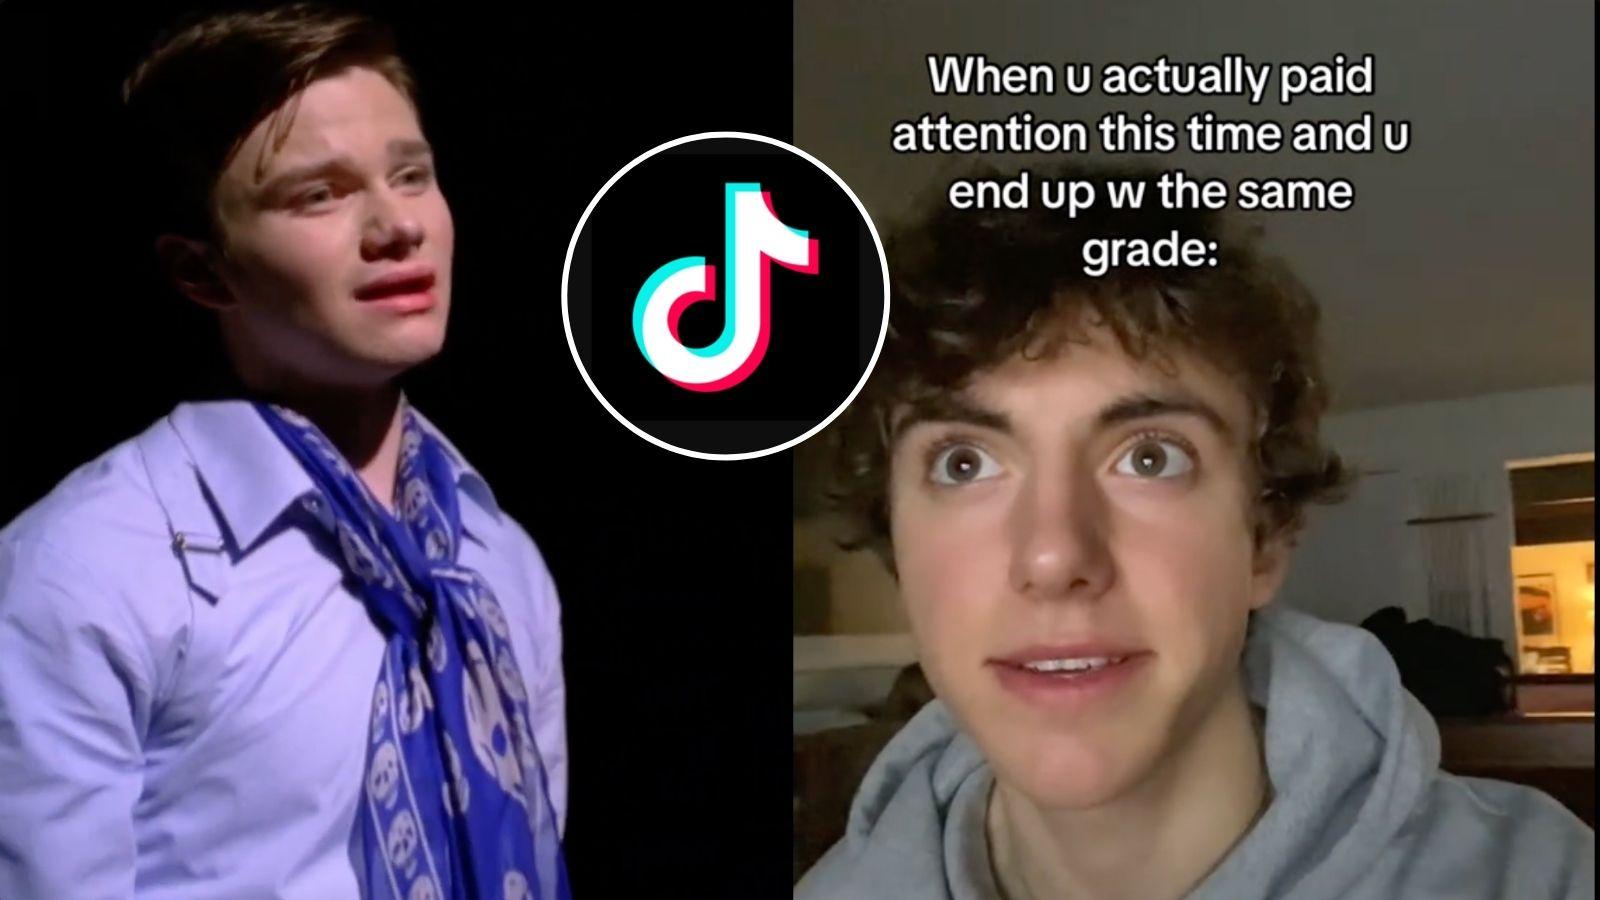 A song from Glee has become a new trend on TikTok